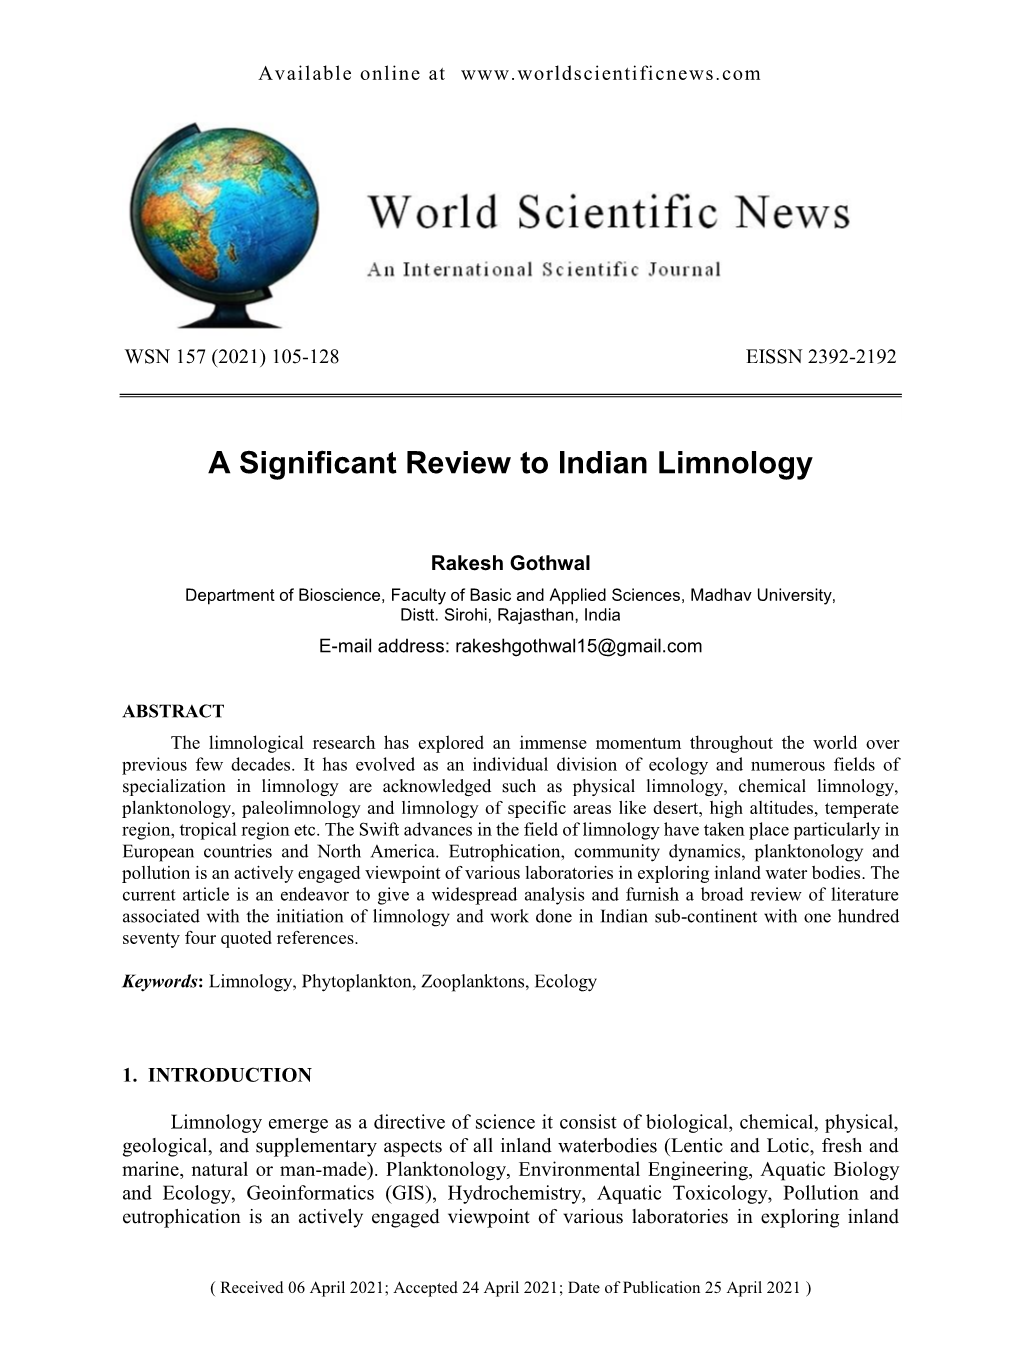 A Significant Review to Indian Limnology